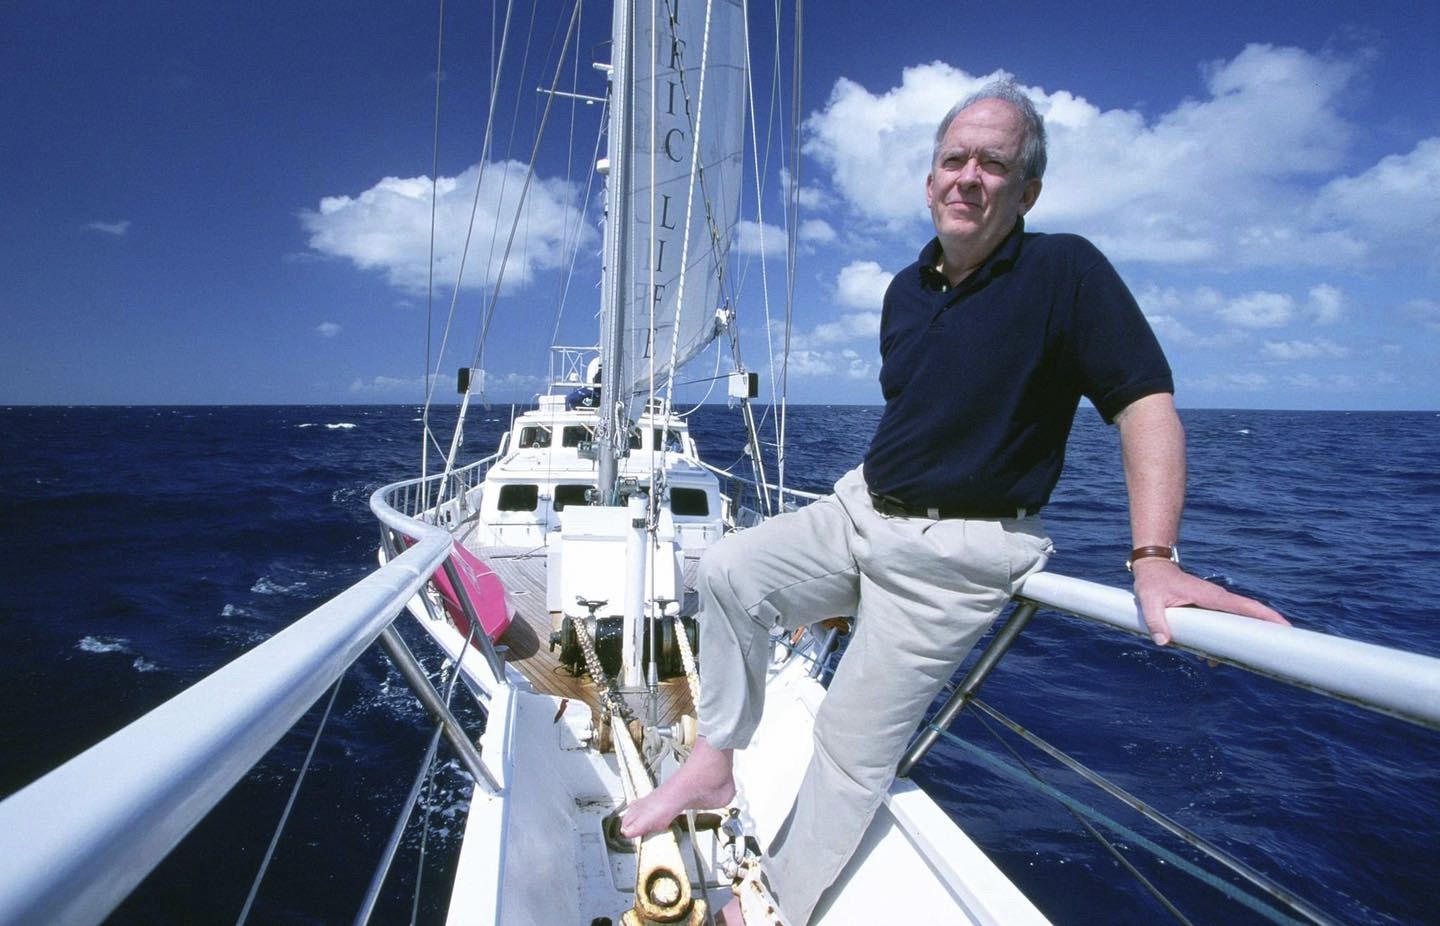 Roger Payne sitting at the end of a yacht wearing a black shirt and beige pants. 